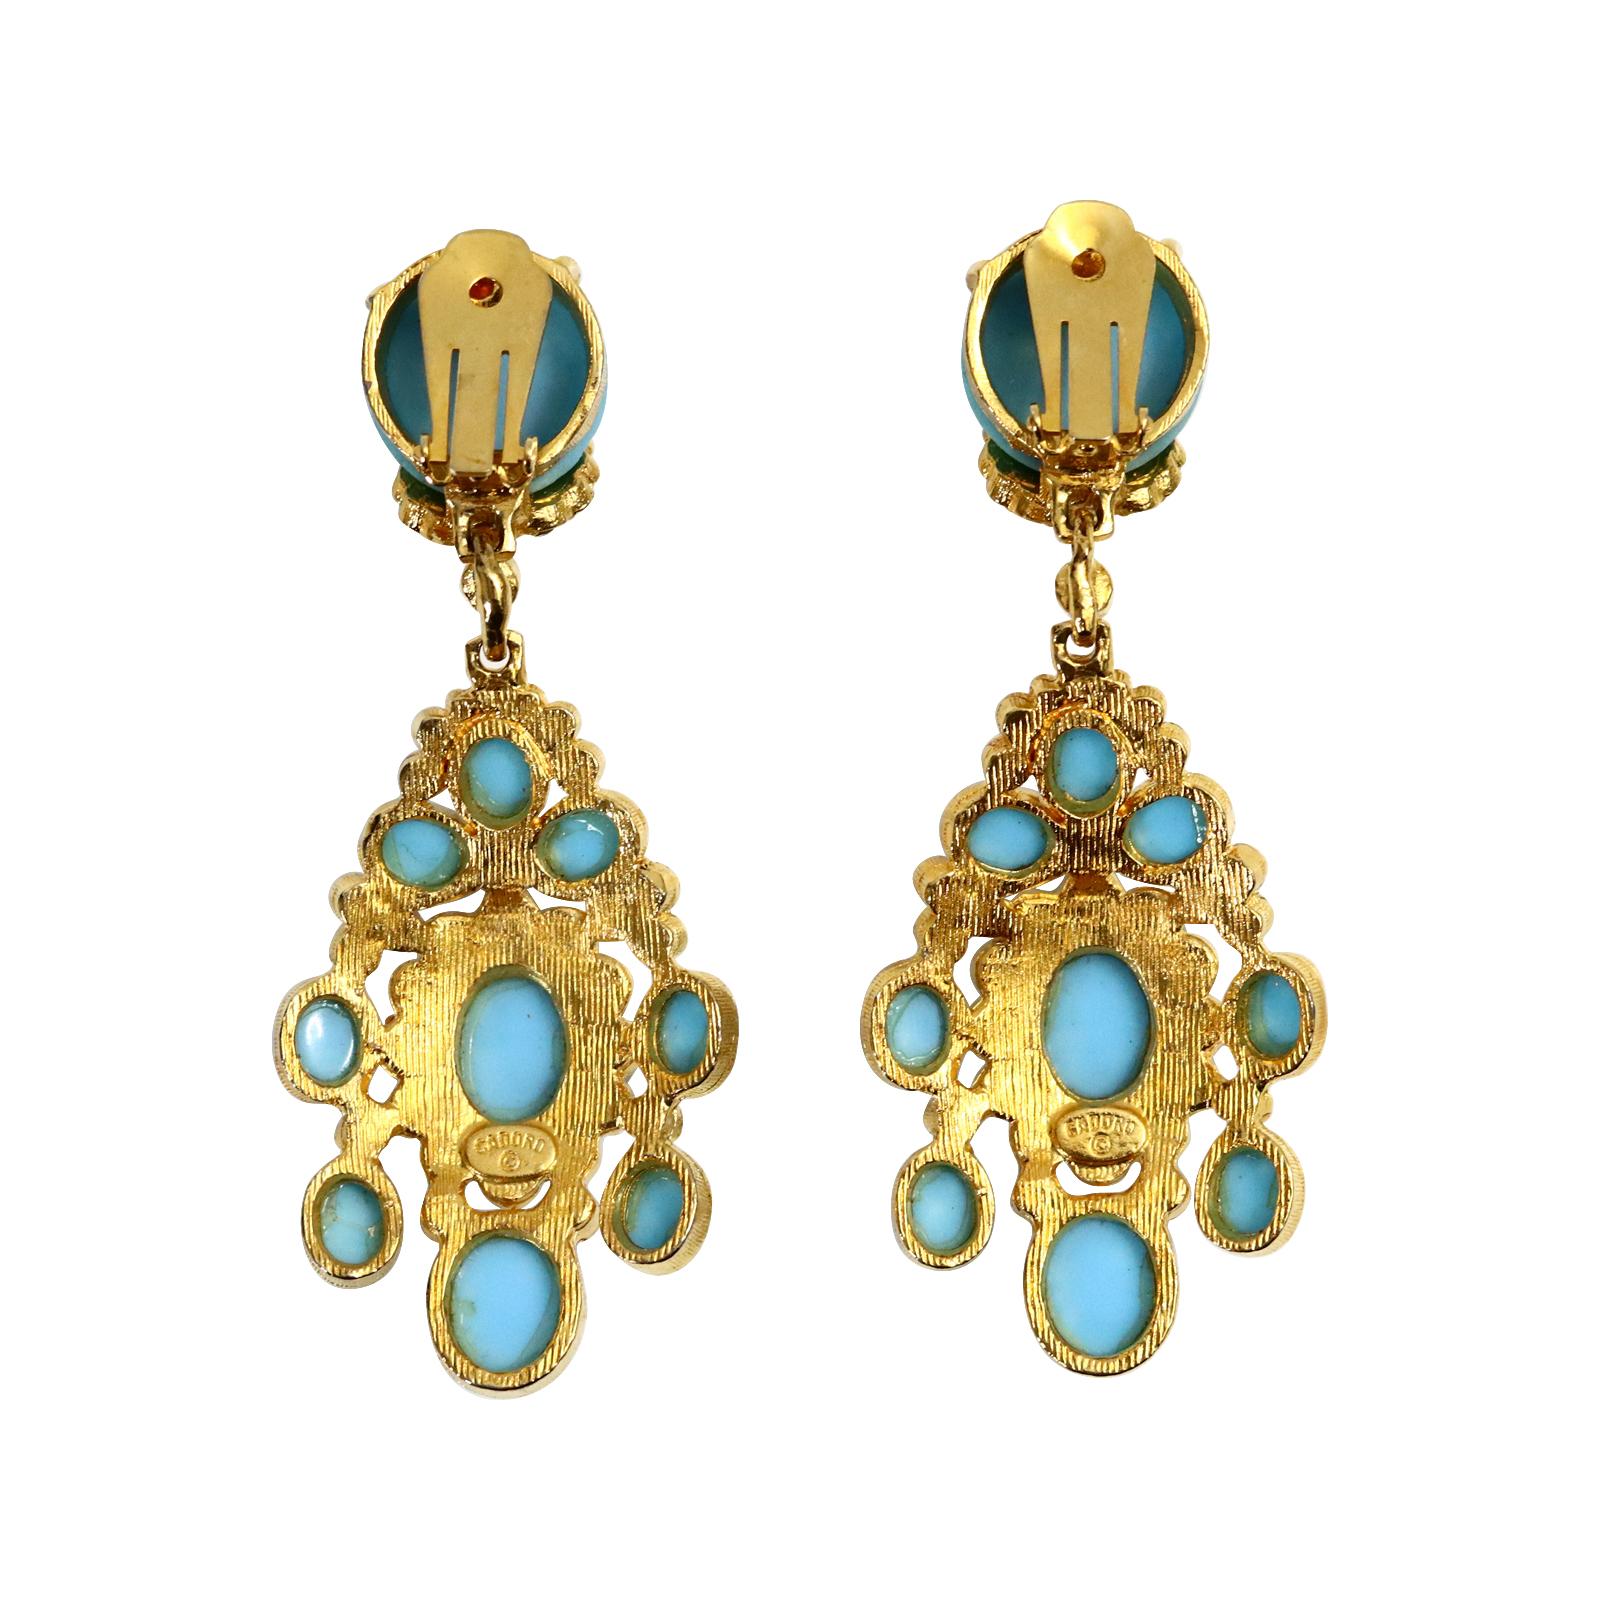 Vintage Cadoro Gold with Faux Turquoise Dangling Earrings Circa 1980s For Sale 3